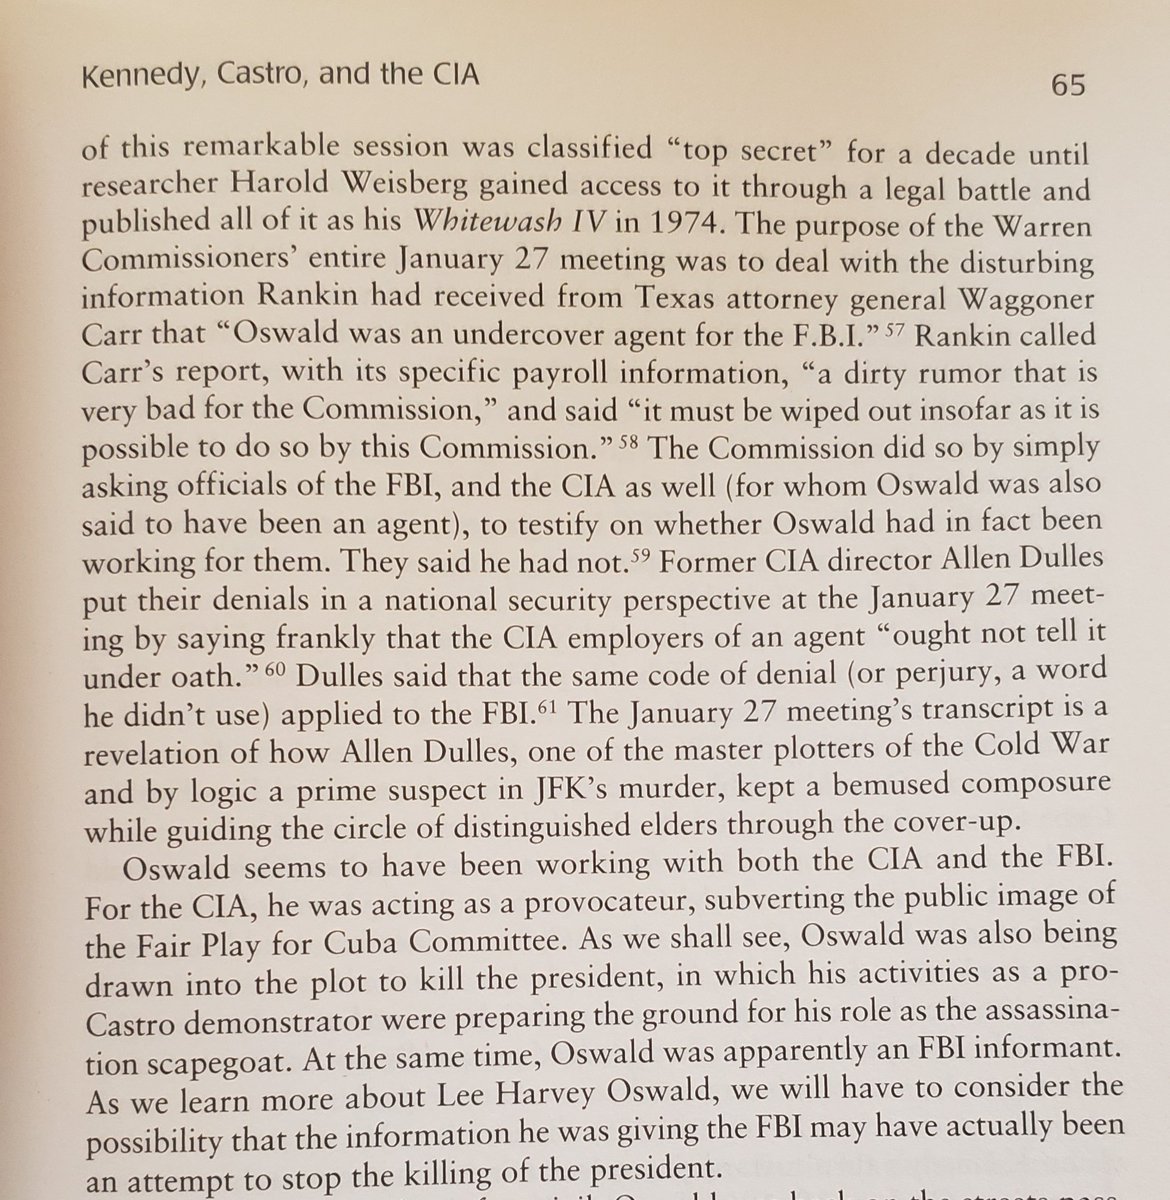 New Orleans: Oswald was arrested for staging/provoking a street fight while handing out Fair Play for Cuba pamphlets. Instead of calling a lawyer, or his wife, he asks for... an FBI agent, by name. Seems strange, until you learn that Oswald was a paid FBI informant.